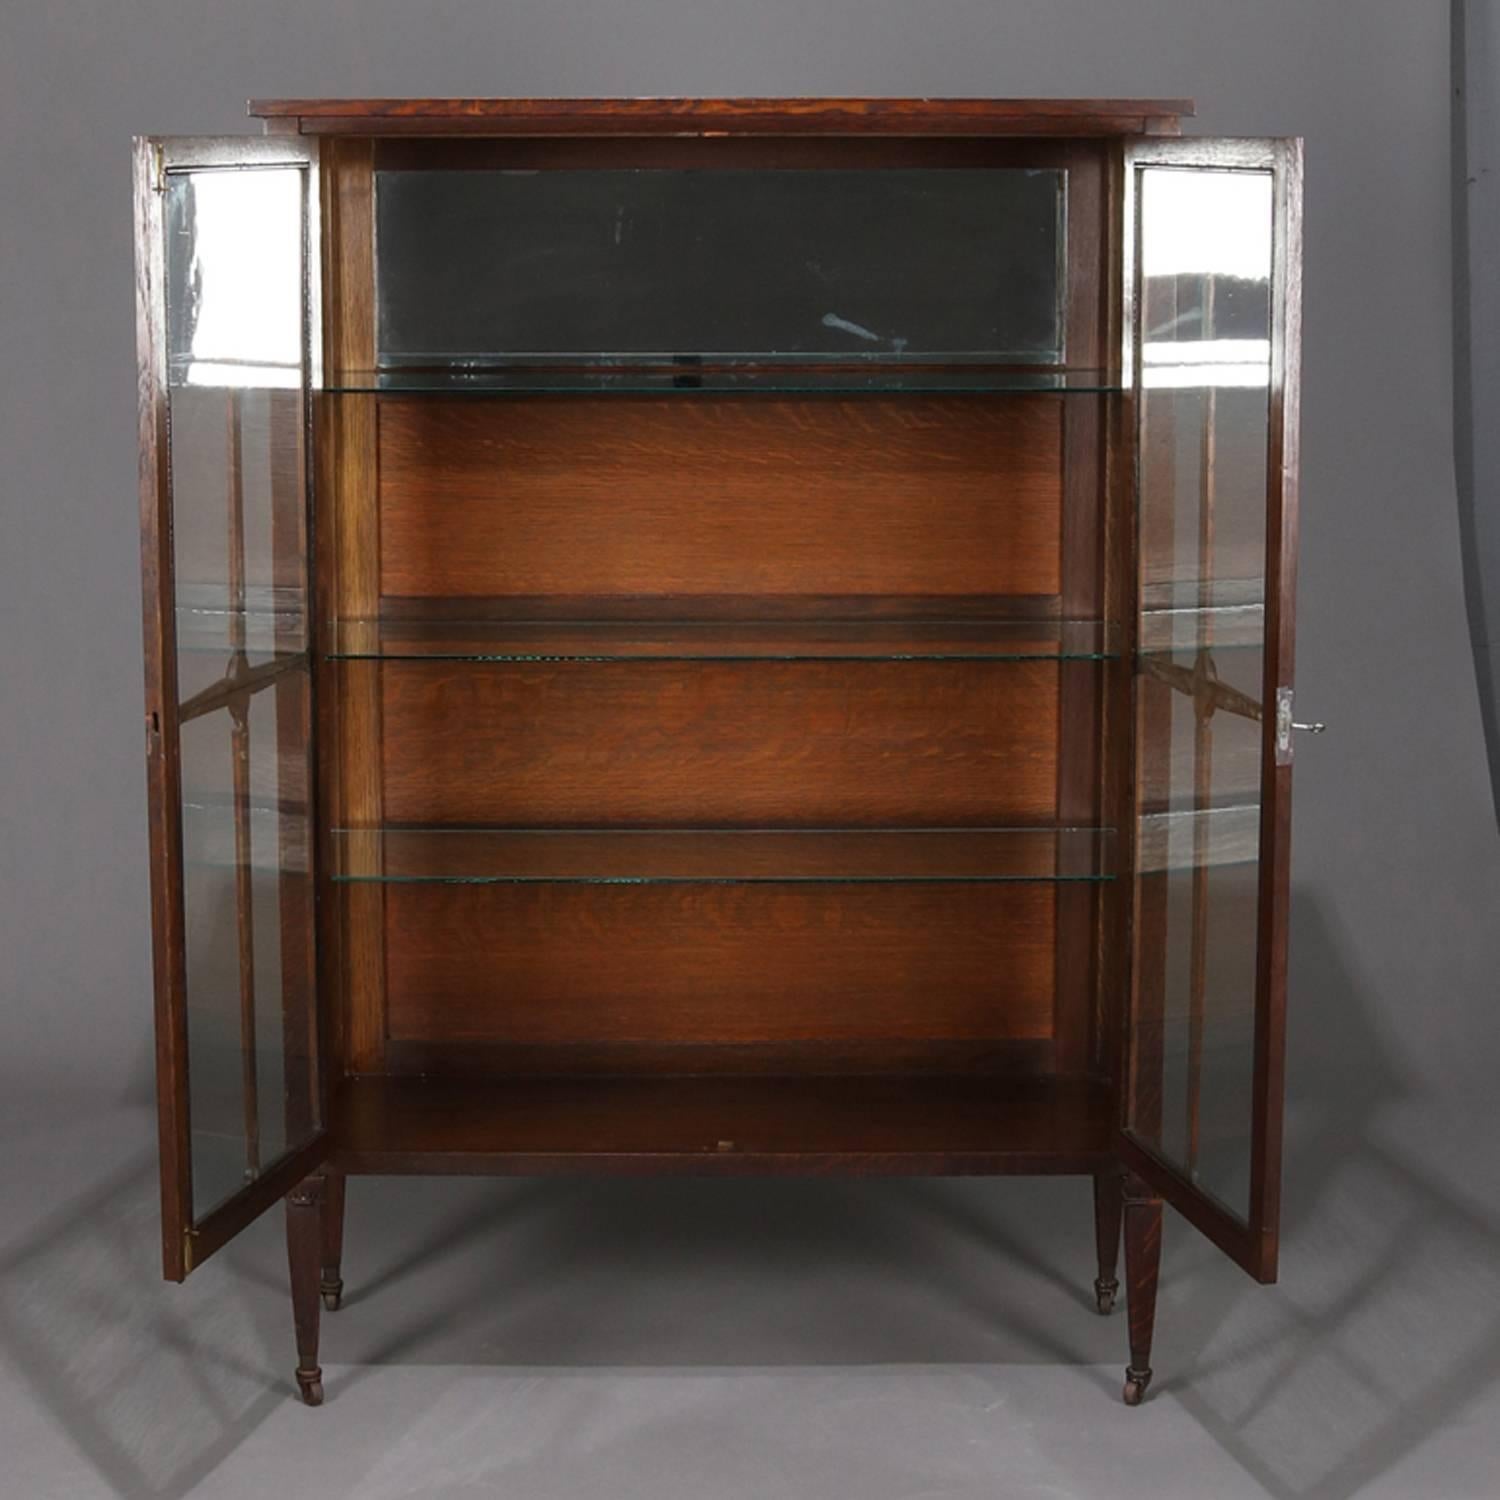 20th Century Arts & Crafts Mission Oak Lifetime Furniture Co. Inlay and Banded Cabinet